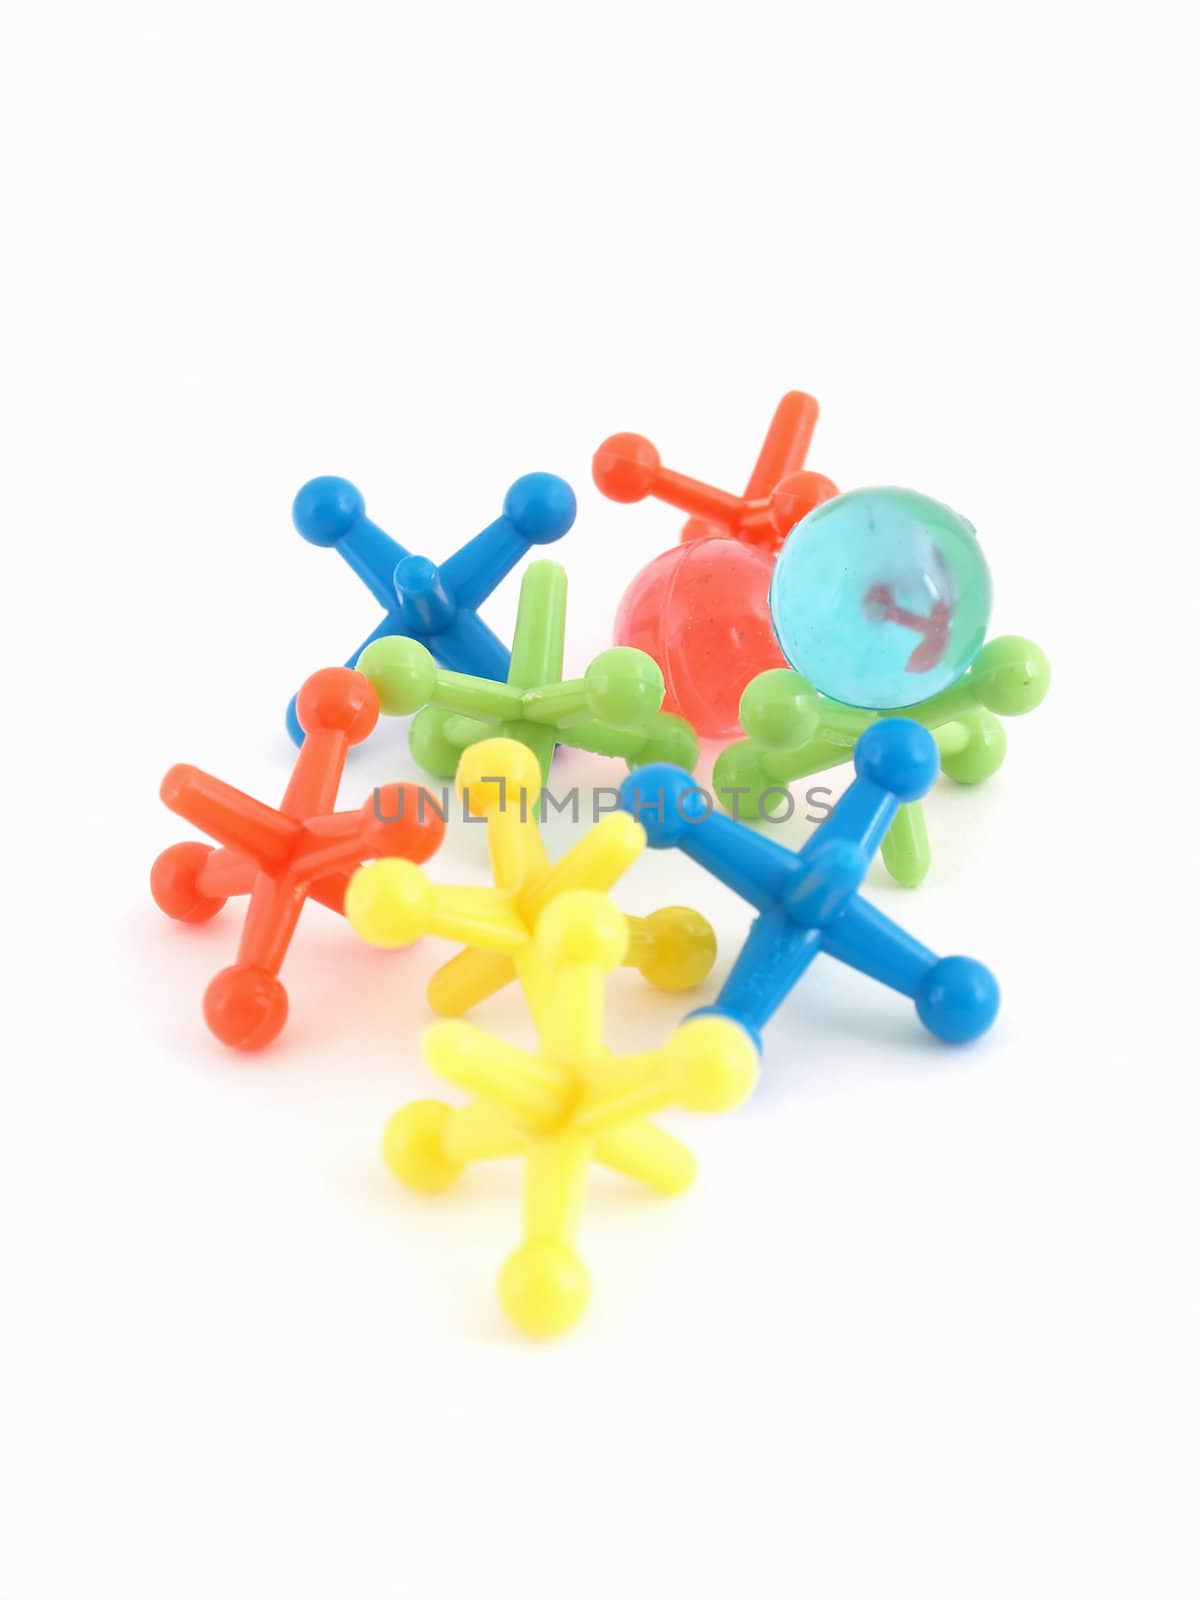 Colorful plastic toy jacks and balls isolated on a white background